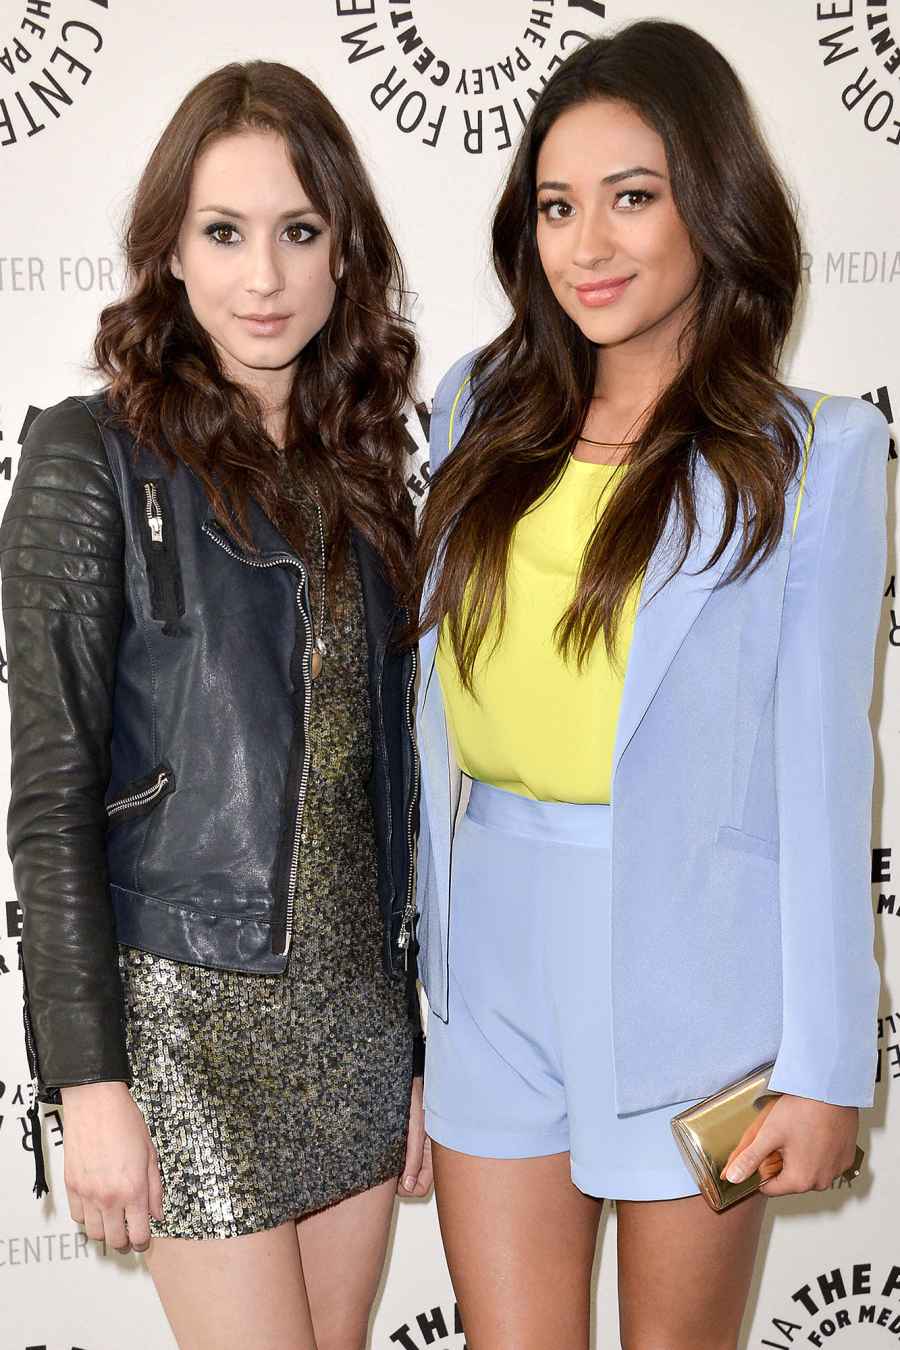 Shay Mitchell and Troian Bellisario Celebrities Who Became BFFs With Their Costars